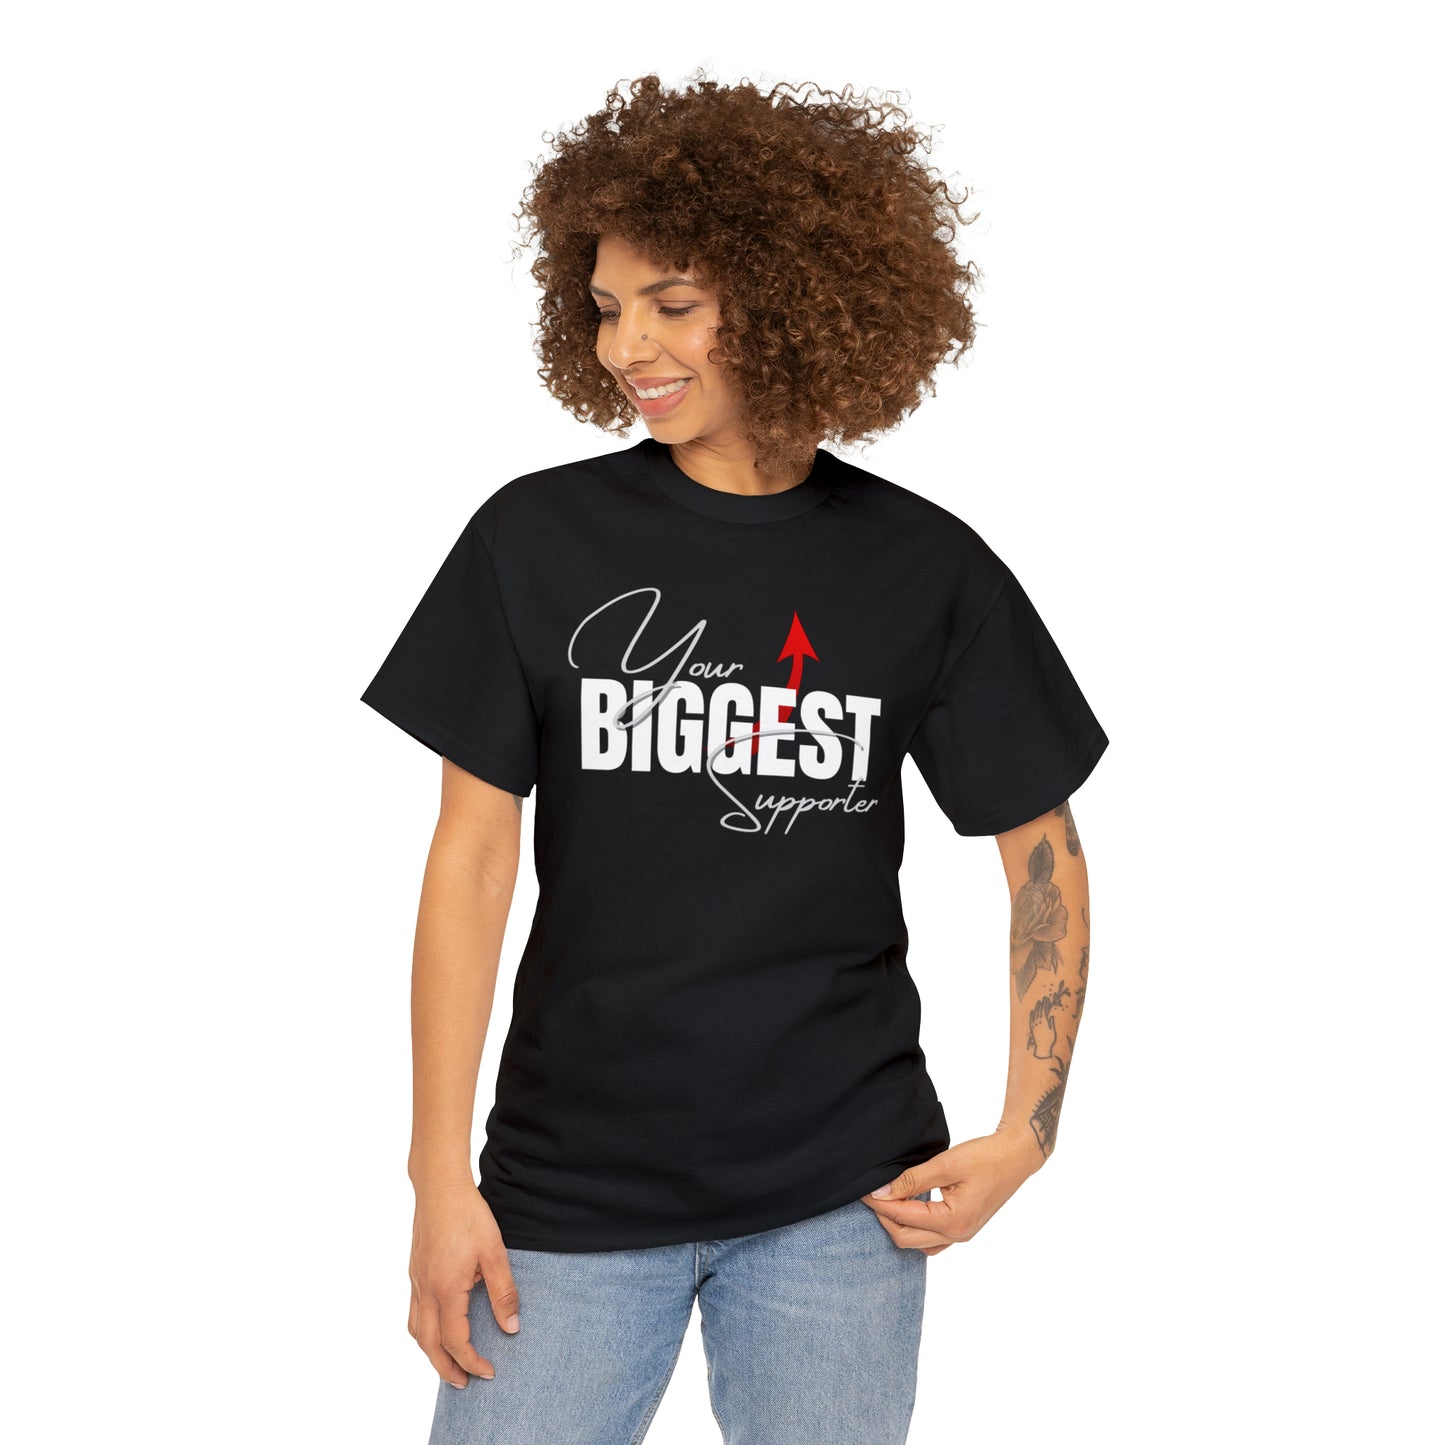 Your Biggest Supporter Unisex Tee Sizes 4XL & 5XL - AH VISION